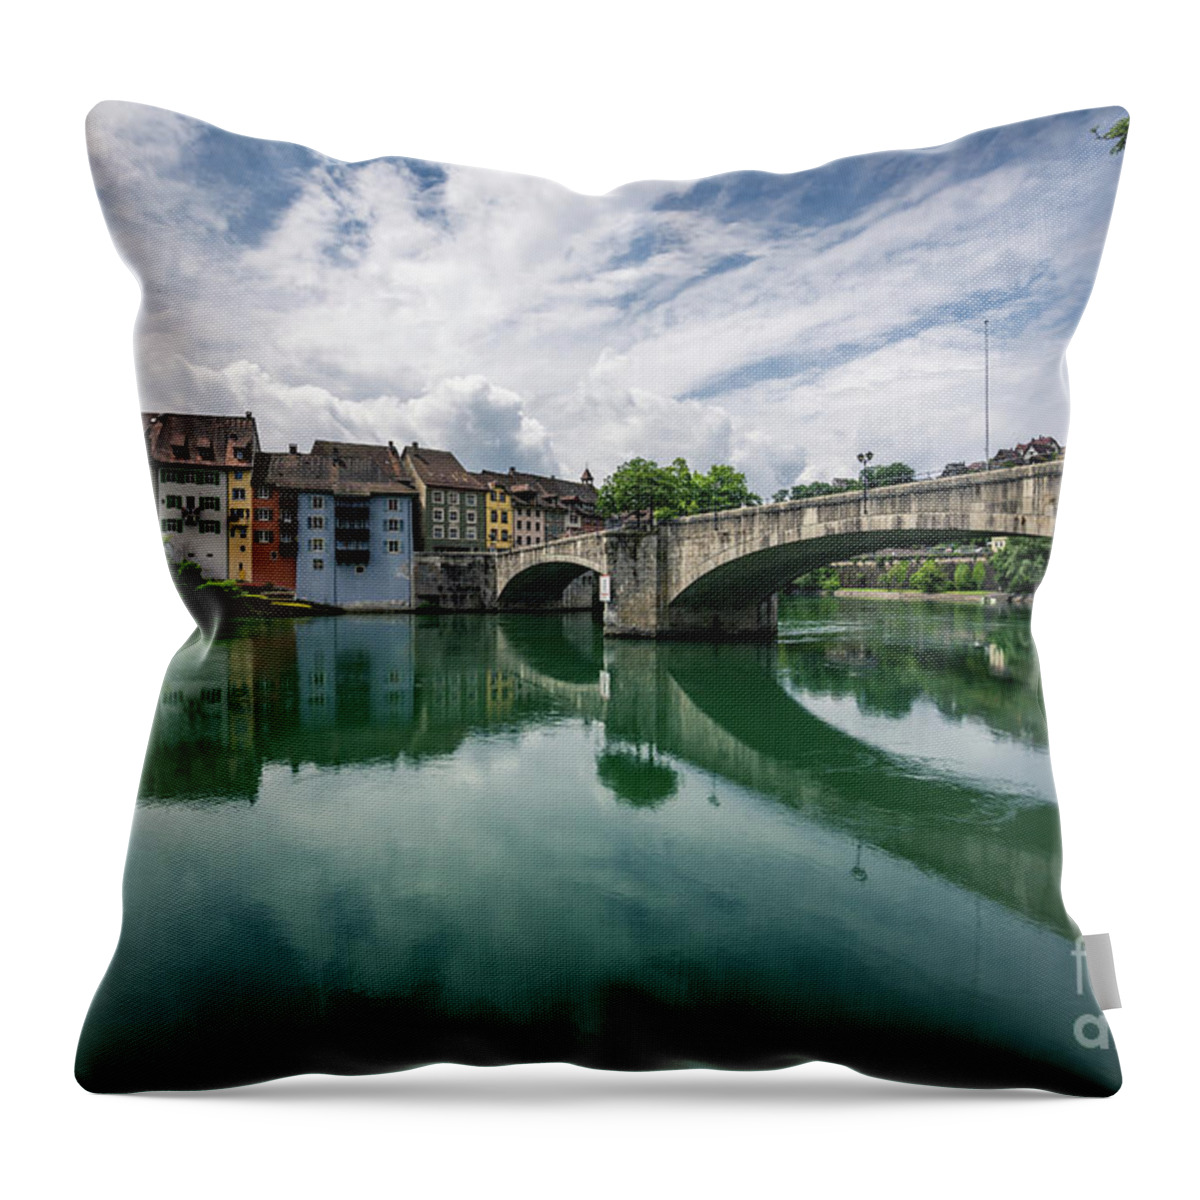 Laufenburg Throw Pillow featuring the photograph Laufenburg Reflections by Eva Lechner